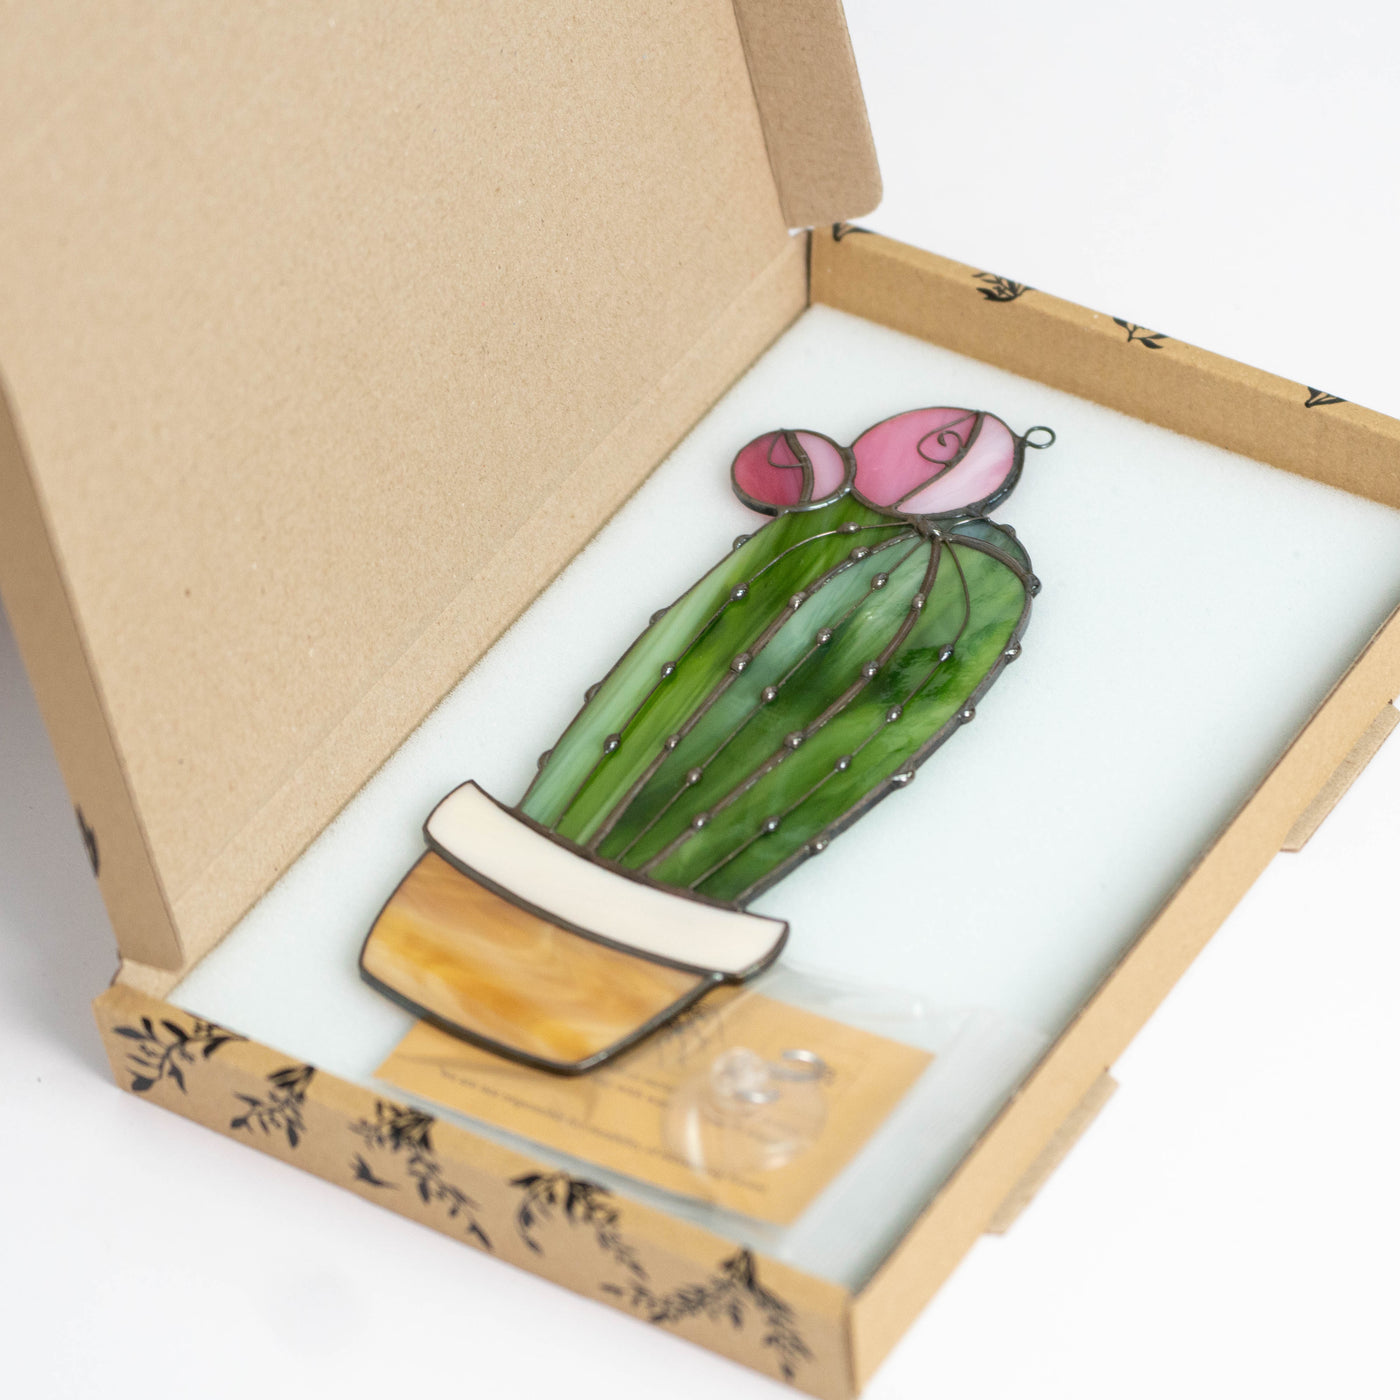 How stained glass cactus suncatcher is packed